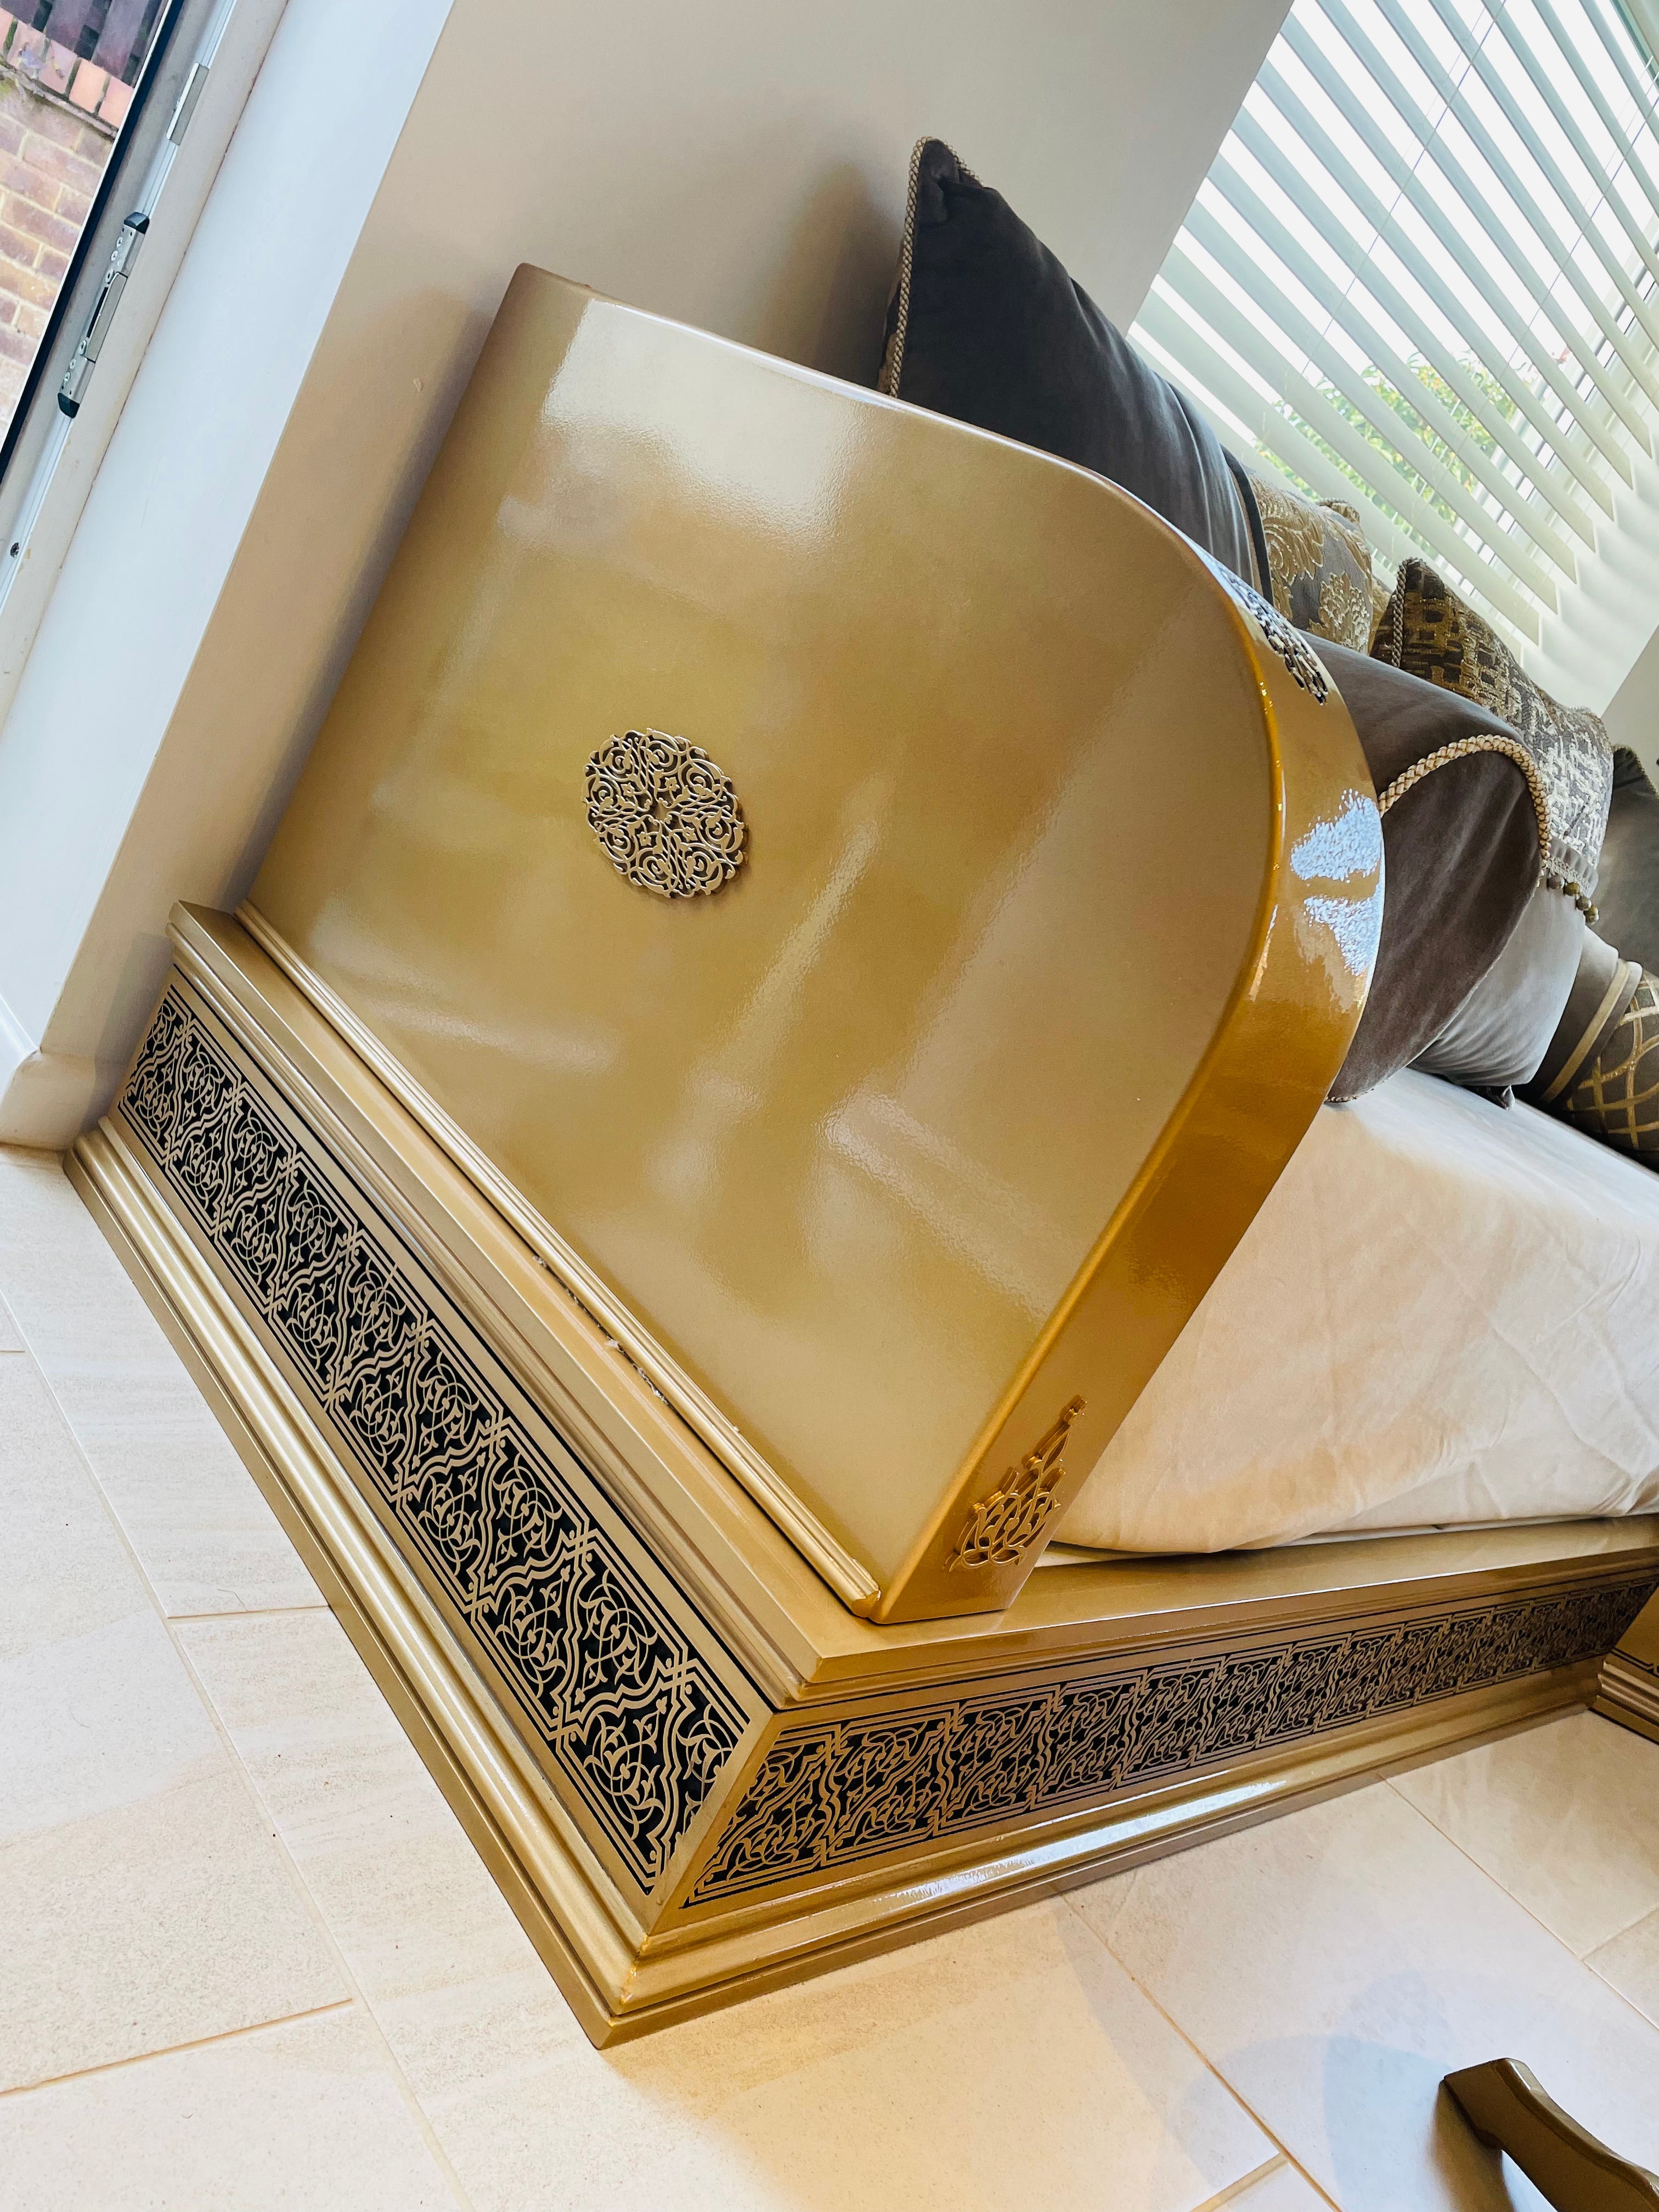 Luxurious Arabesque Moroccan Custom Sofas | Daybed Made to Measure In UK